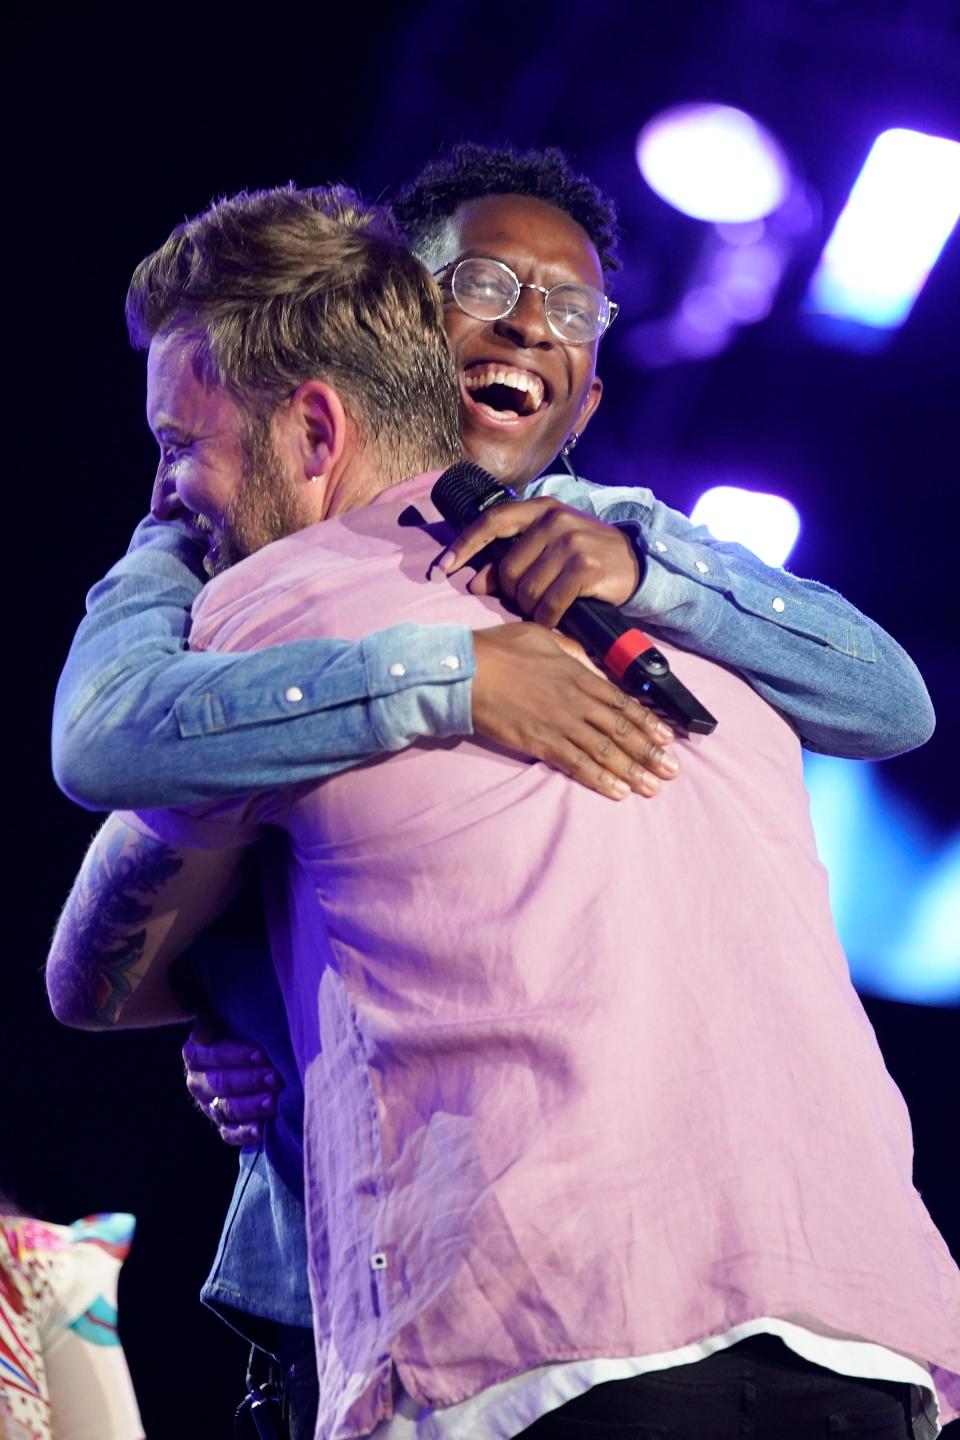 Charles Kelley of Lady A embraces BRELAND after they performed together during CMA Fest at Nissan Stadium Sunday, June 12, 2022 in Nashville, Tennessee.